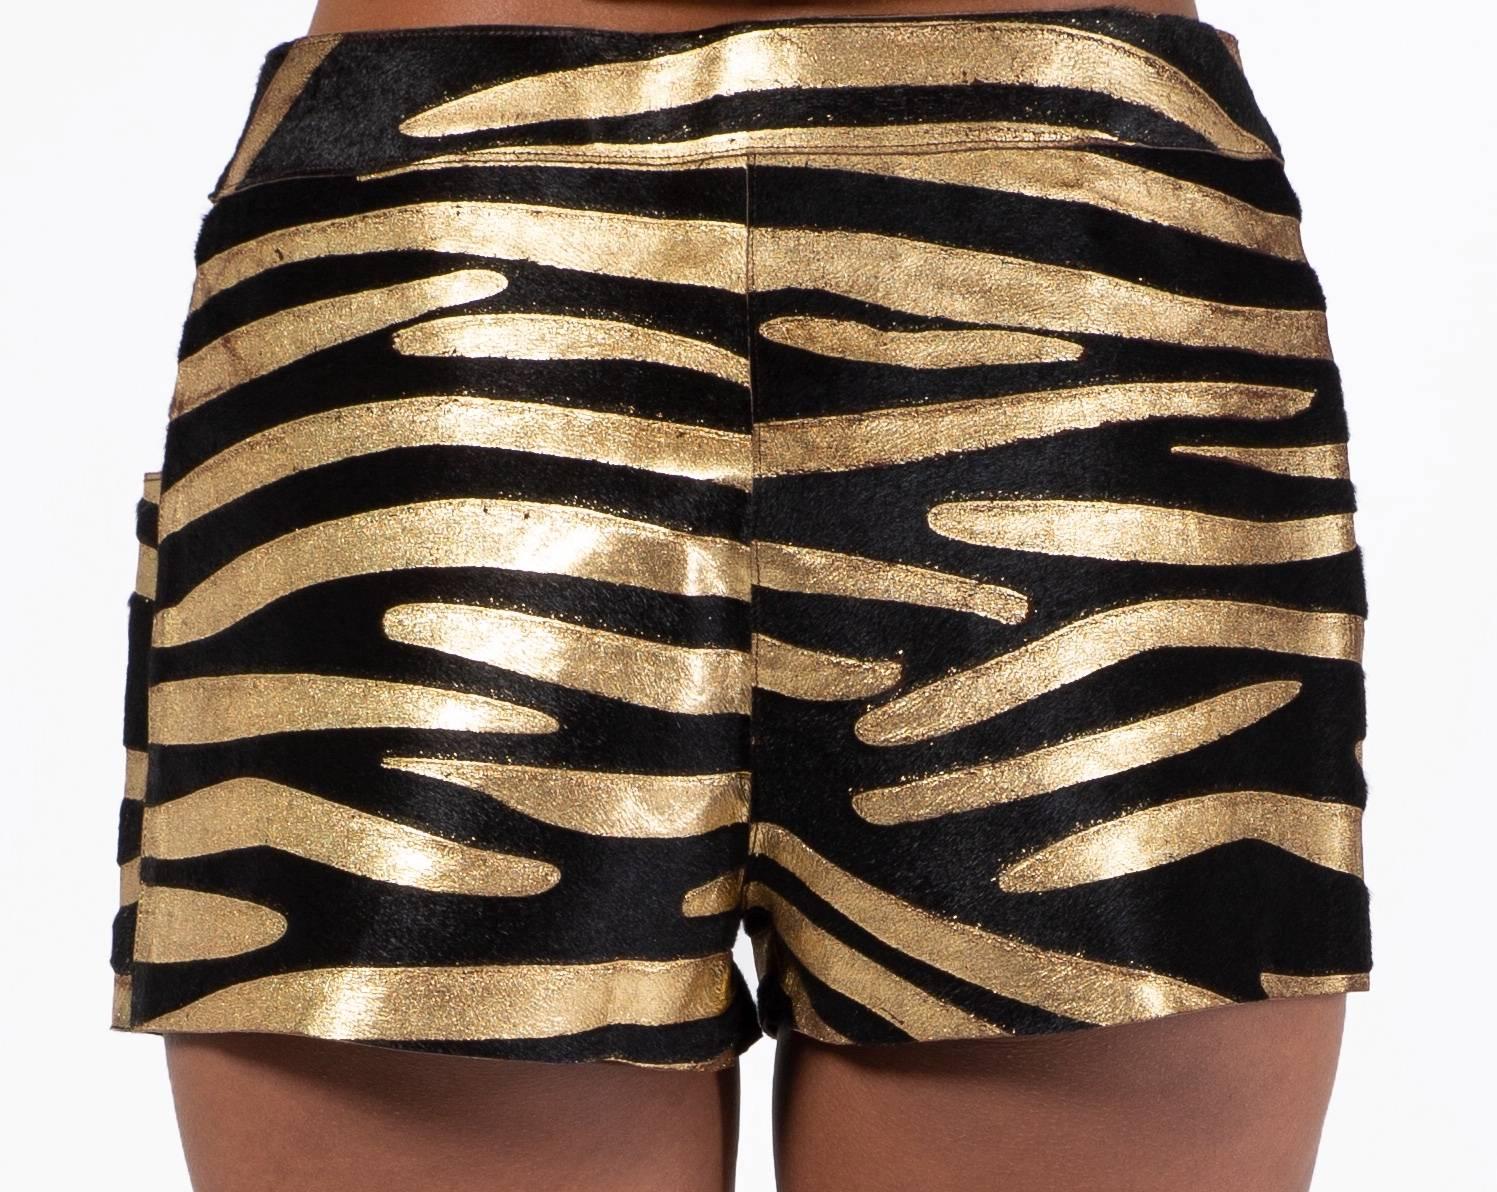 Chanel Zebra shorts from the Cruise 2001 collection. Done  in calfskin of metallic  gold and black zebra stripe. Closes in the front with a concealed zipper and gold button. Fully lined in silk printed with the interlocking CC logo. 